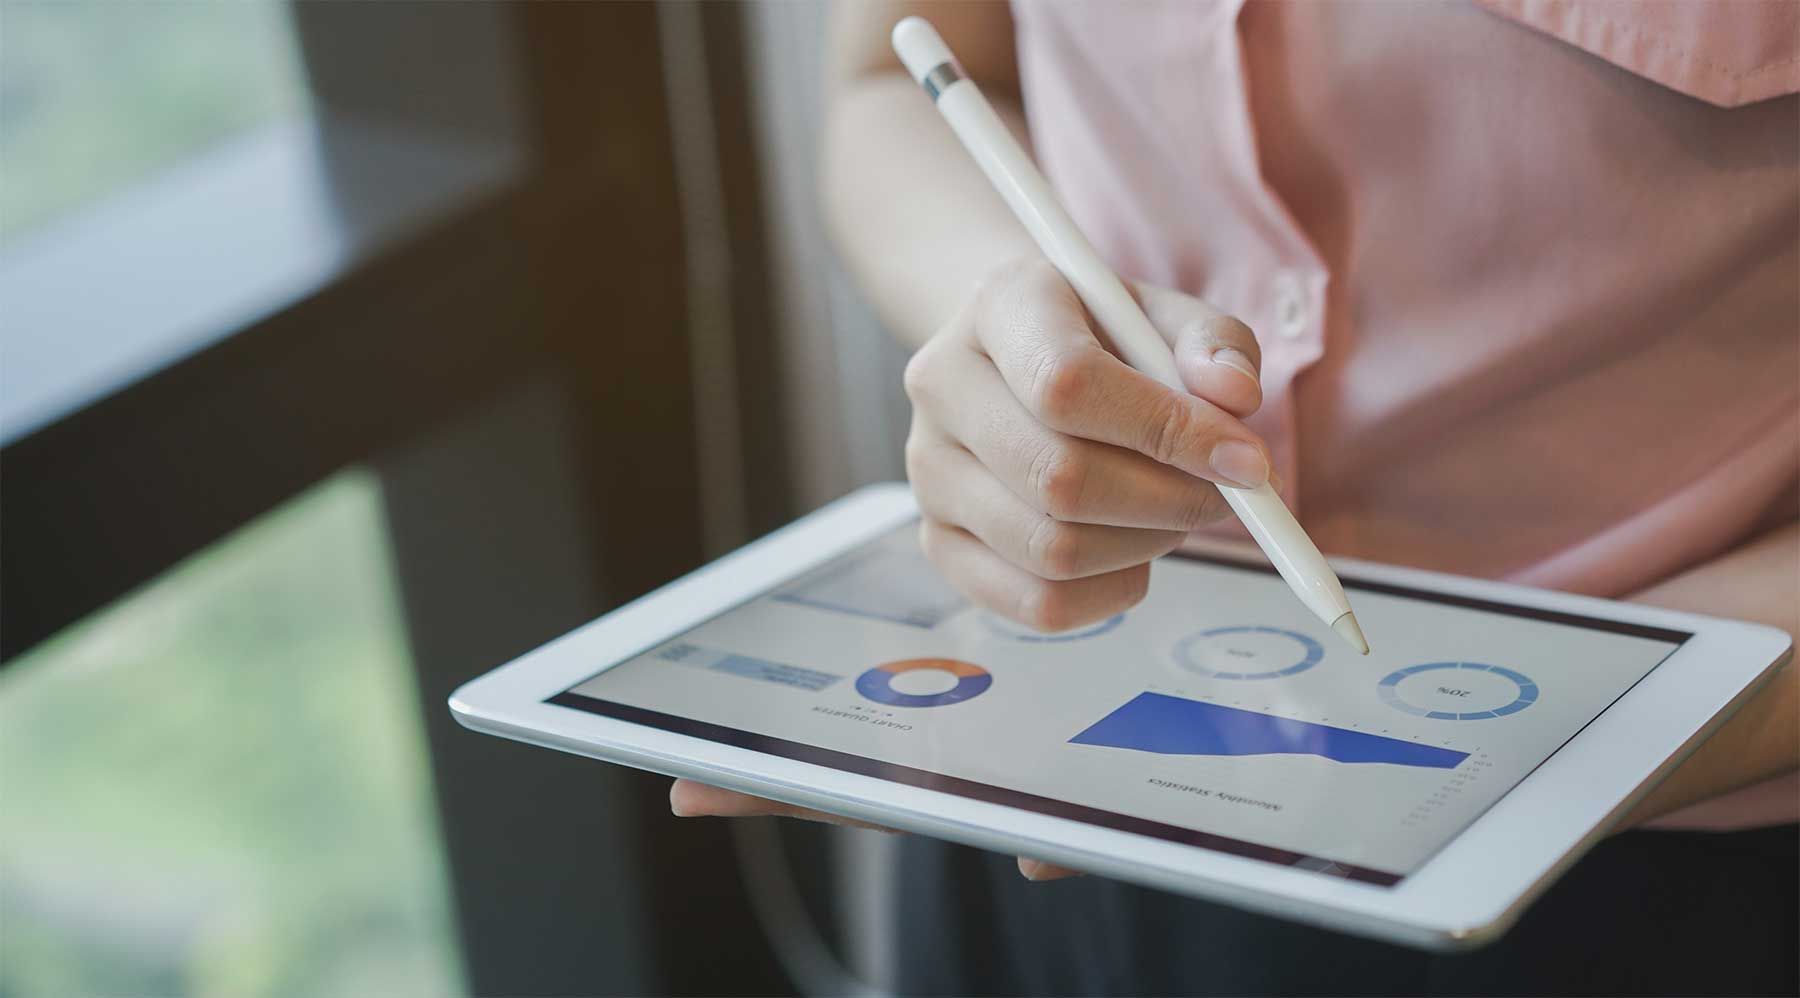 person using a tablet and stylus to monitor analytics